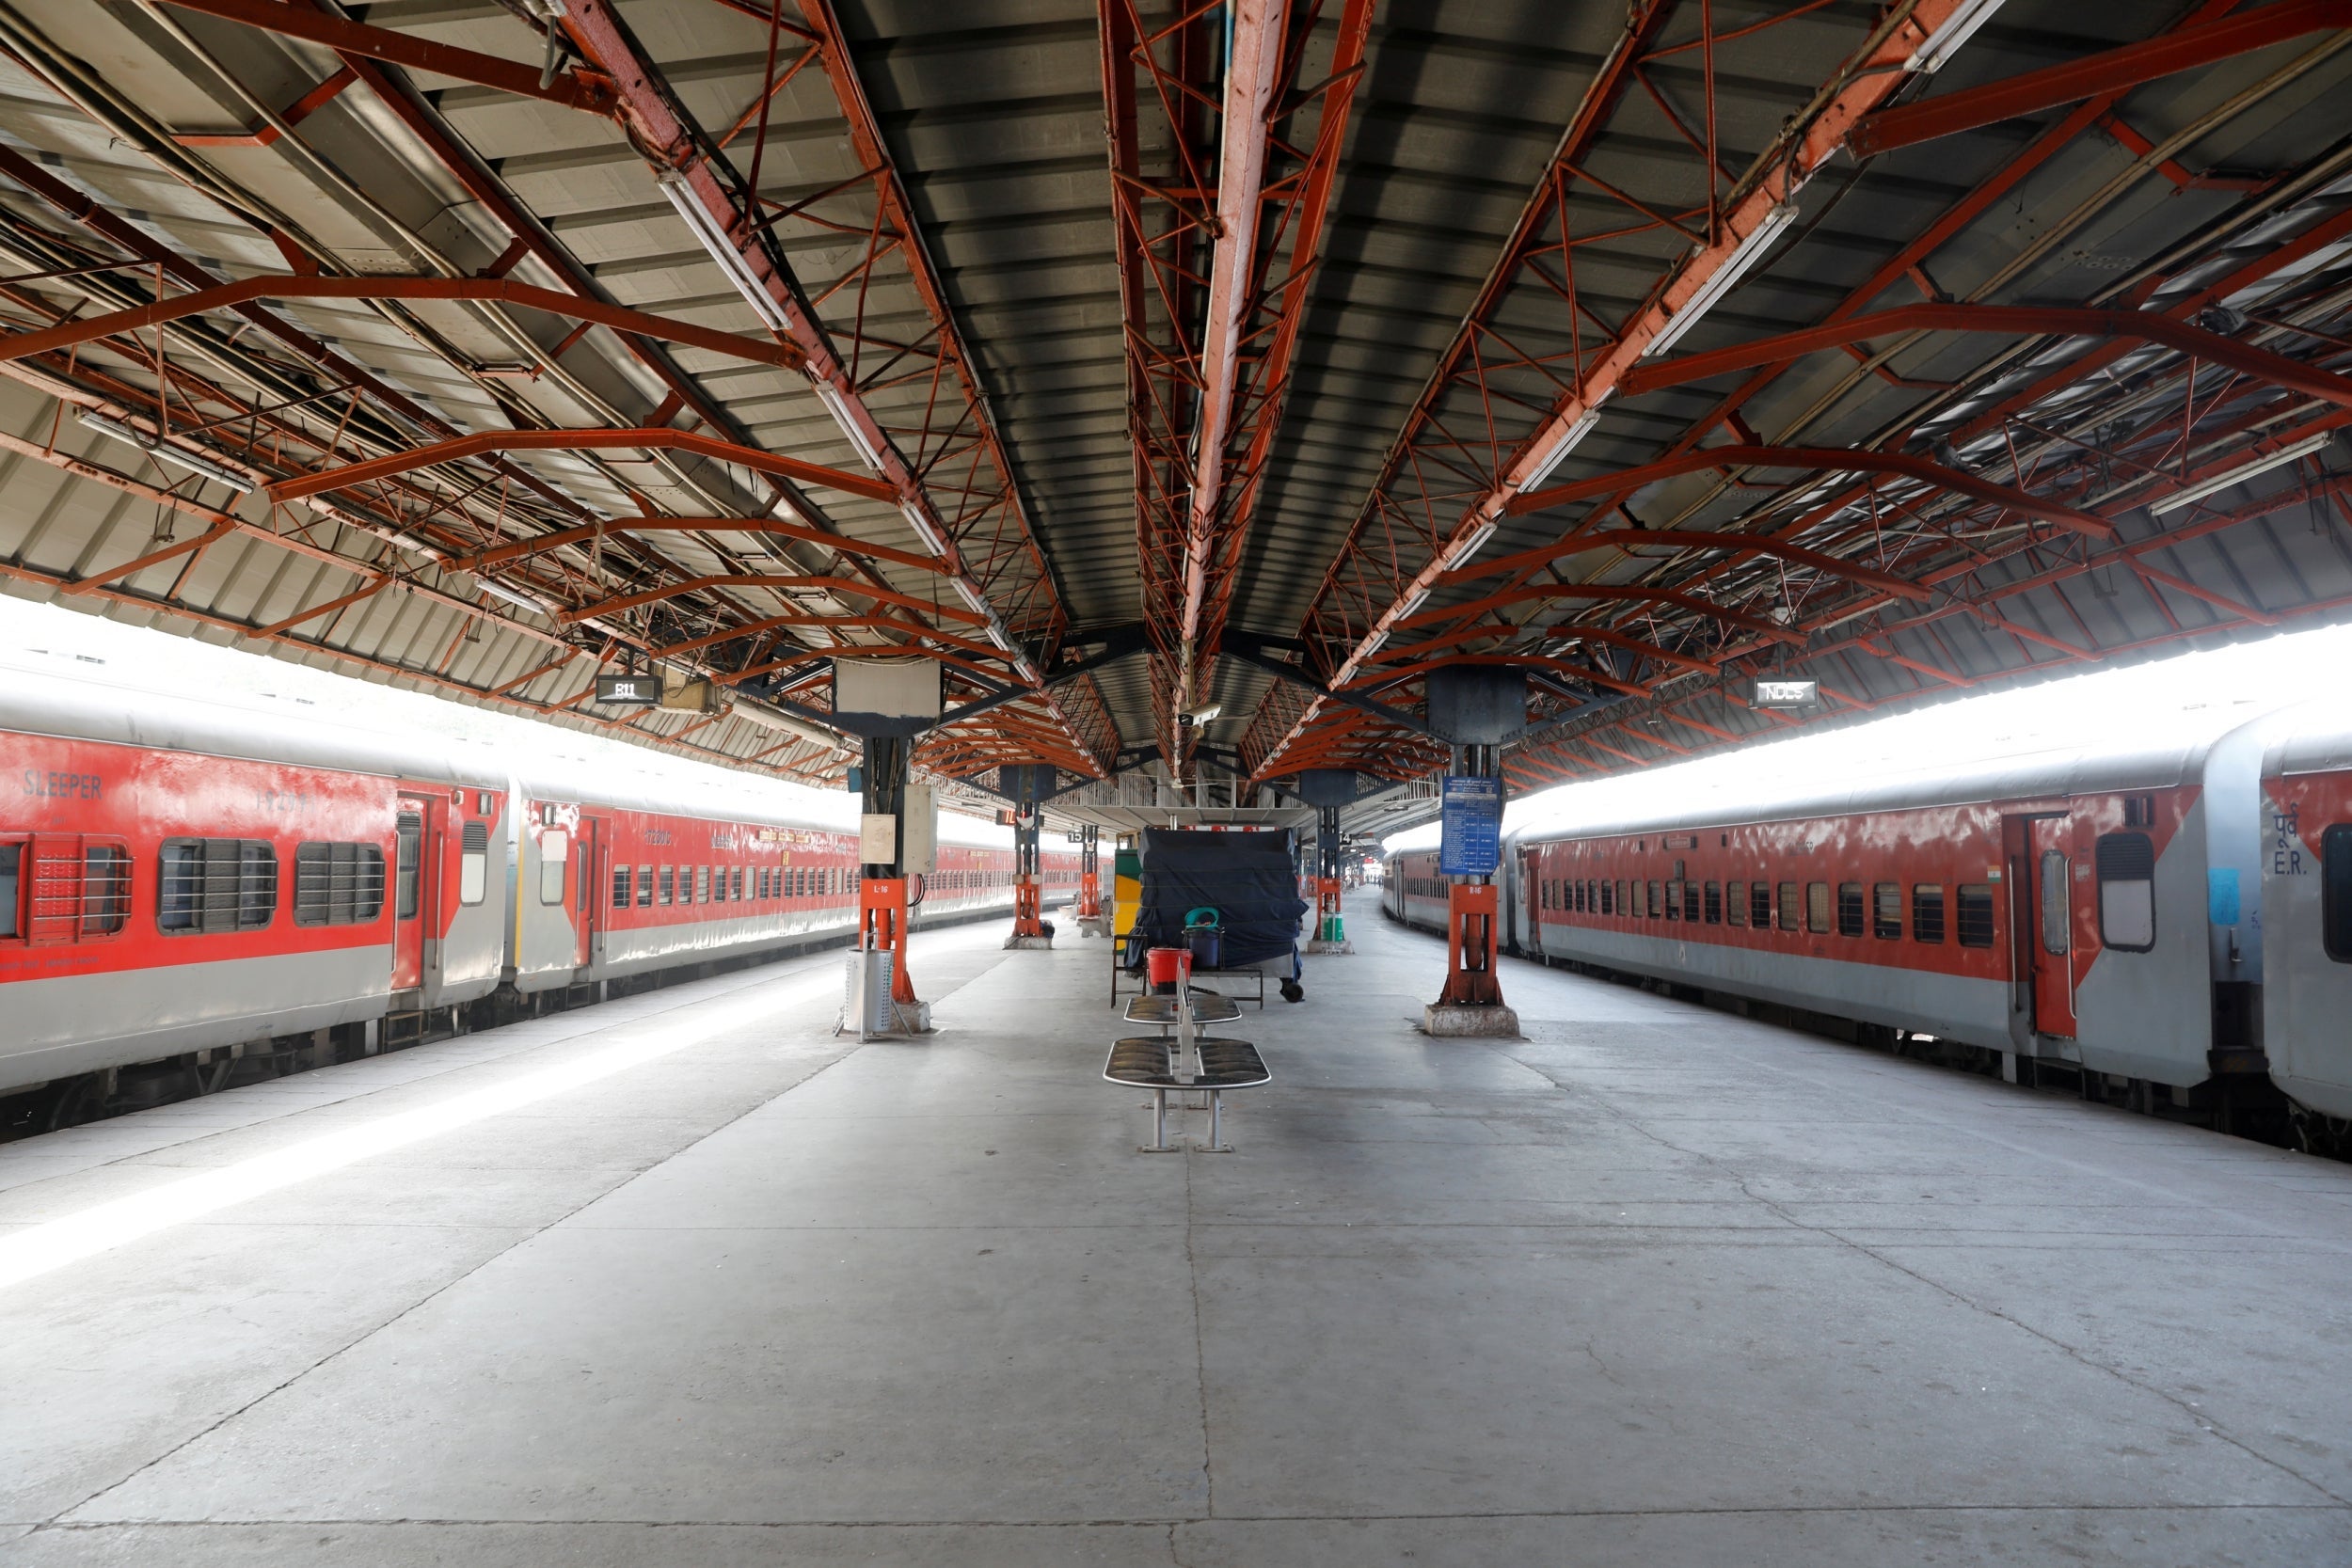 A view shows a deserted platform at a railway station during lockdown by the authorities in Delhi